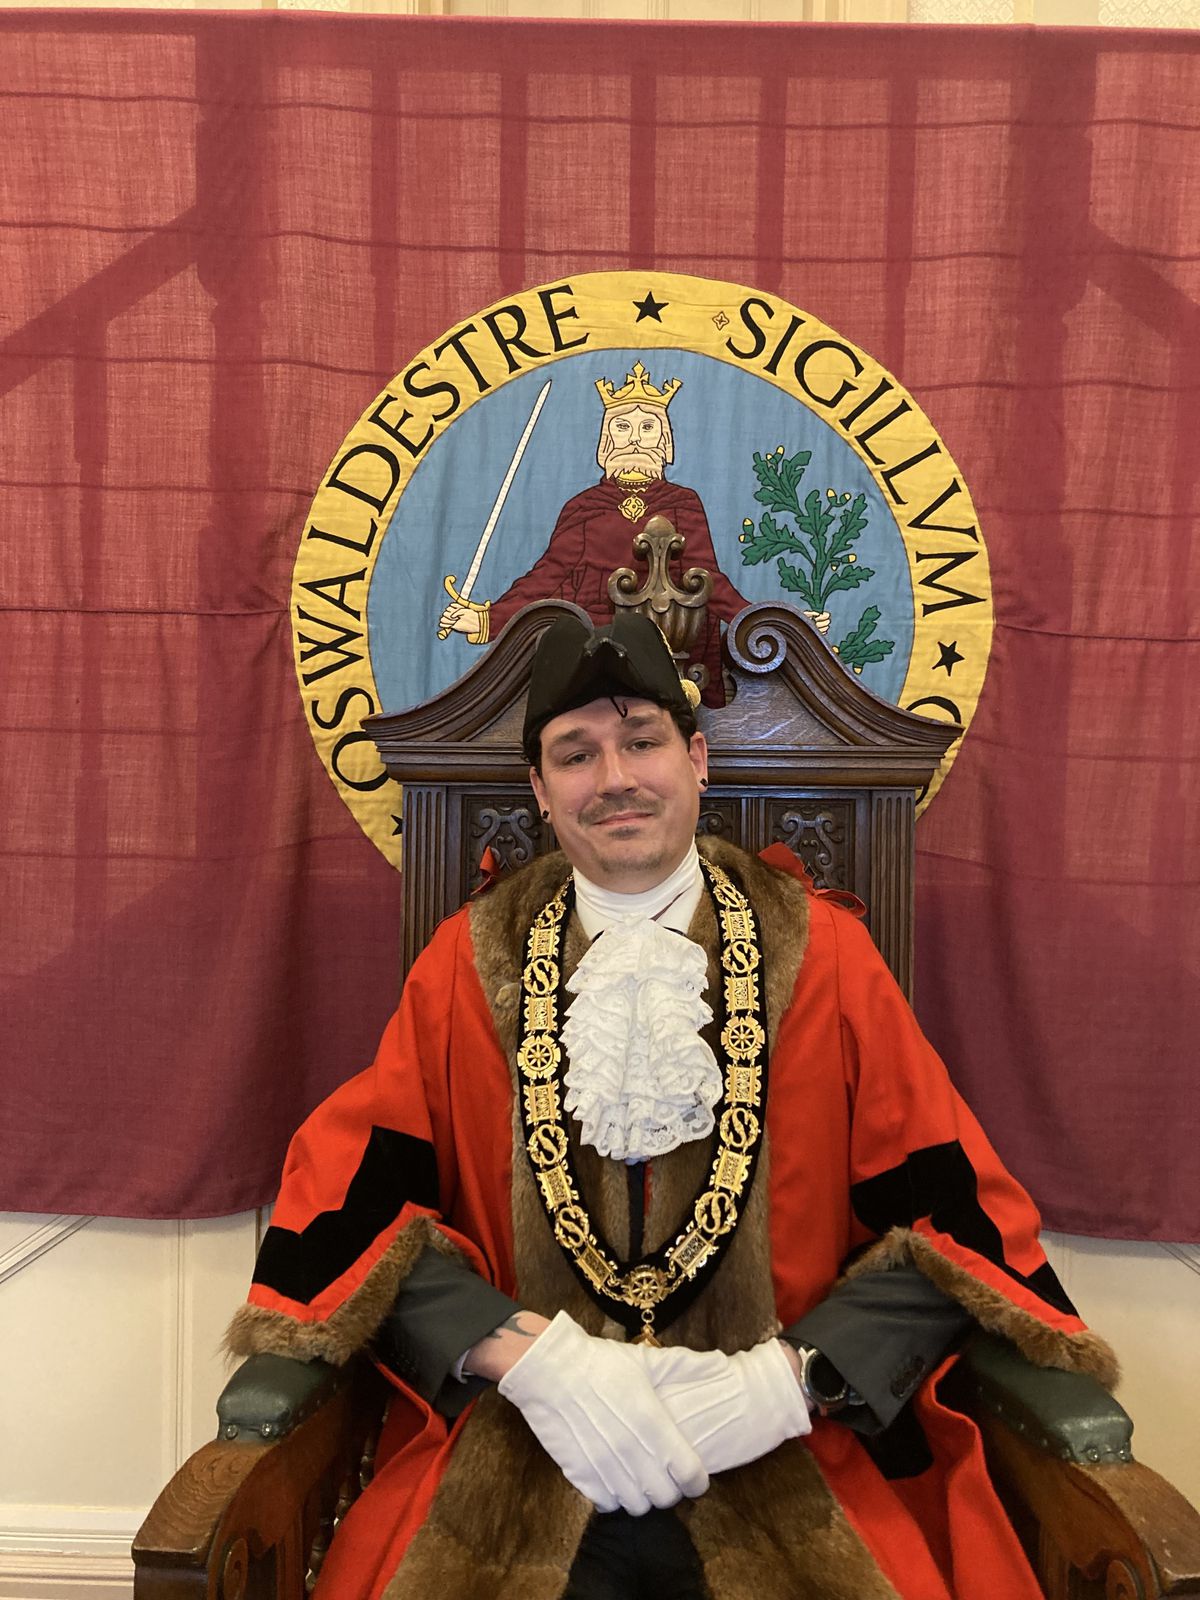 Oswestry mayor, Councillor Jay Moore